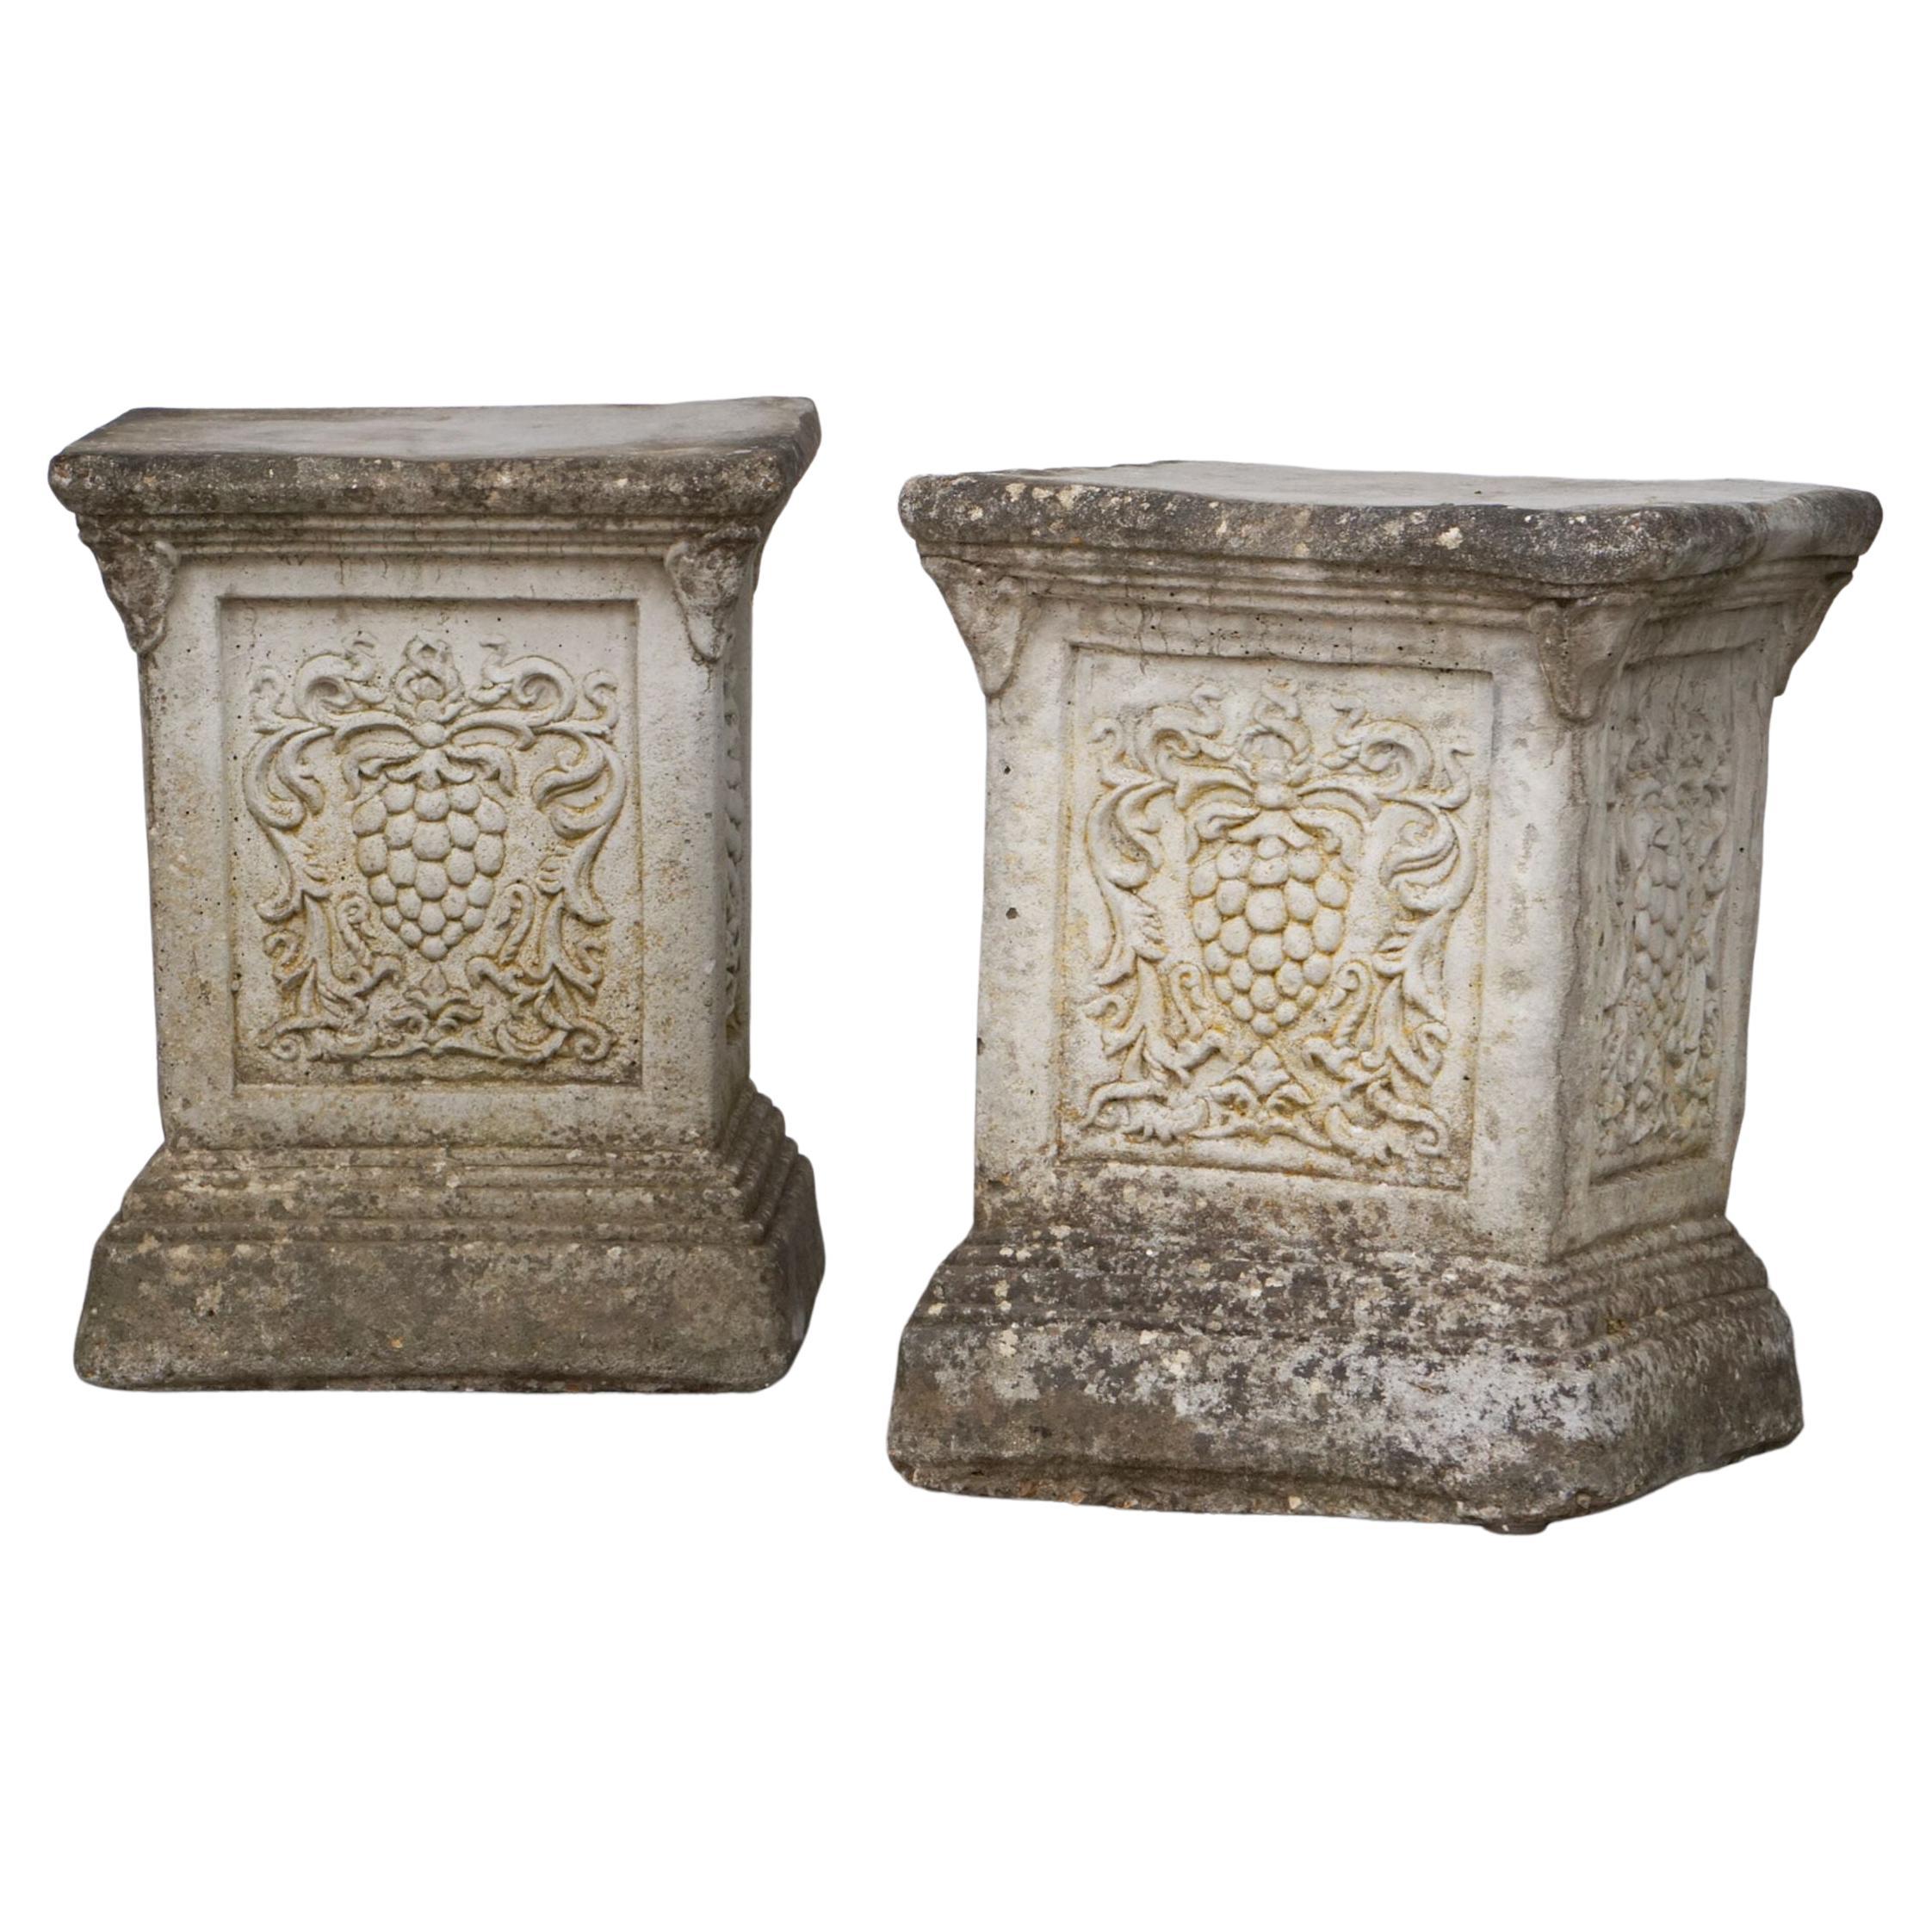 A fine pair of English garden plinths or pedestals of composition stone for use as an ornamental garden feature or display pedestal. Each plinth featuring a square top over four sides with a relief of grapes on each panel.

Individually priced -